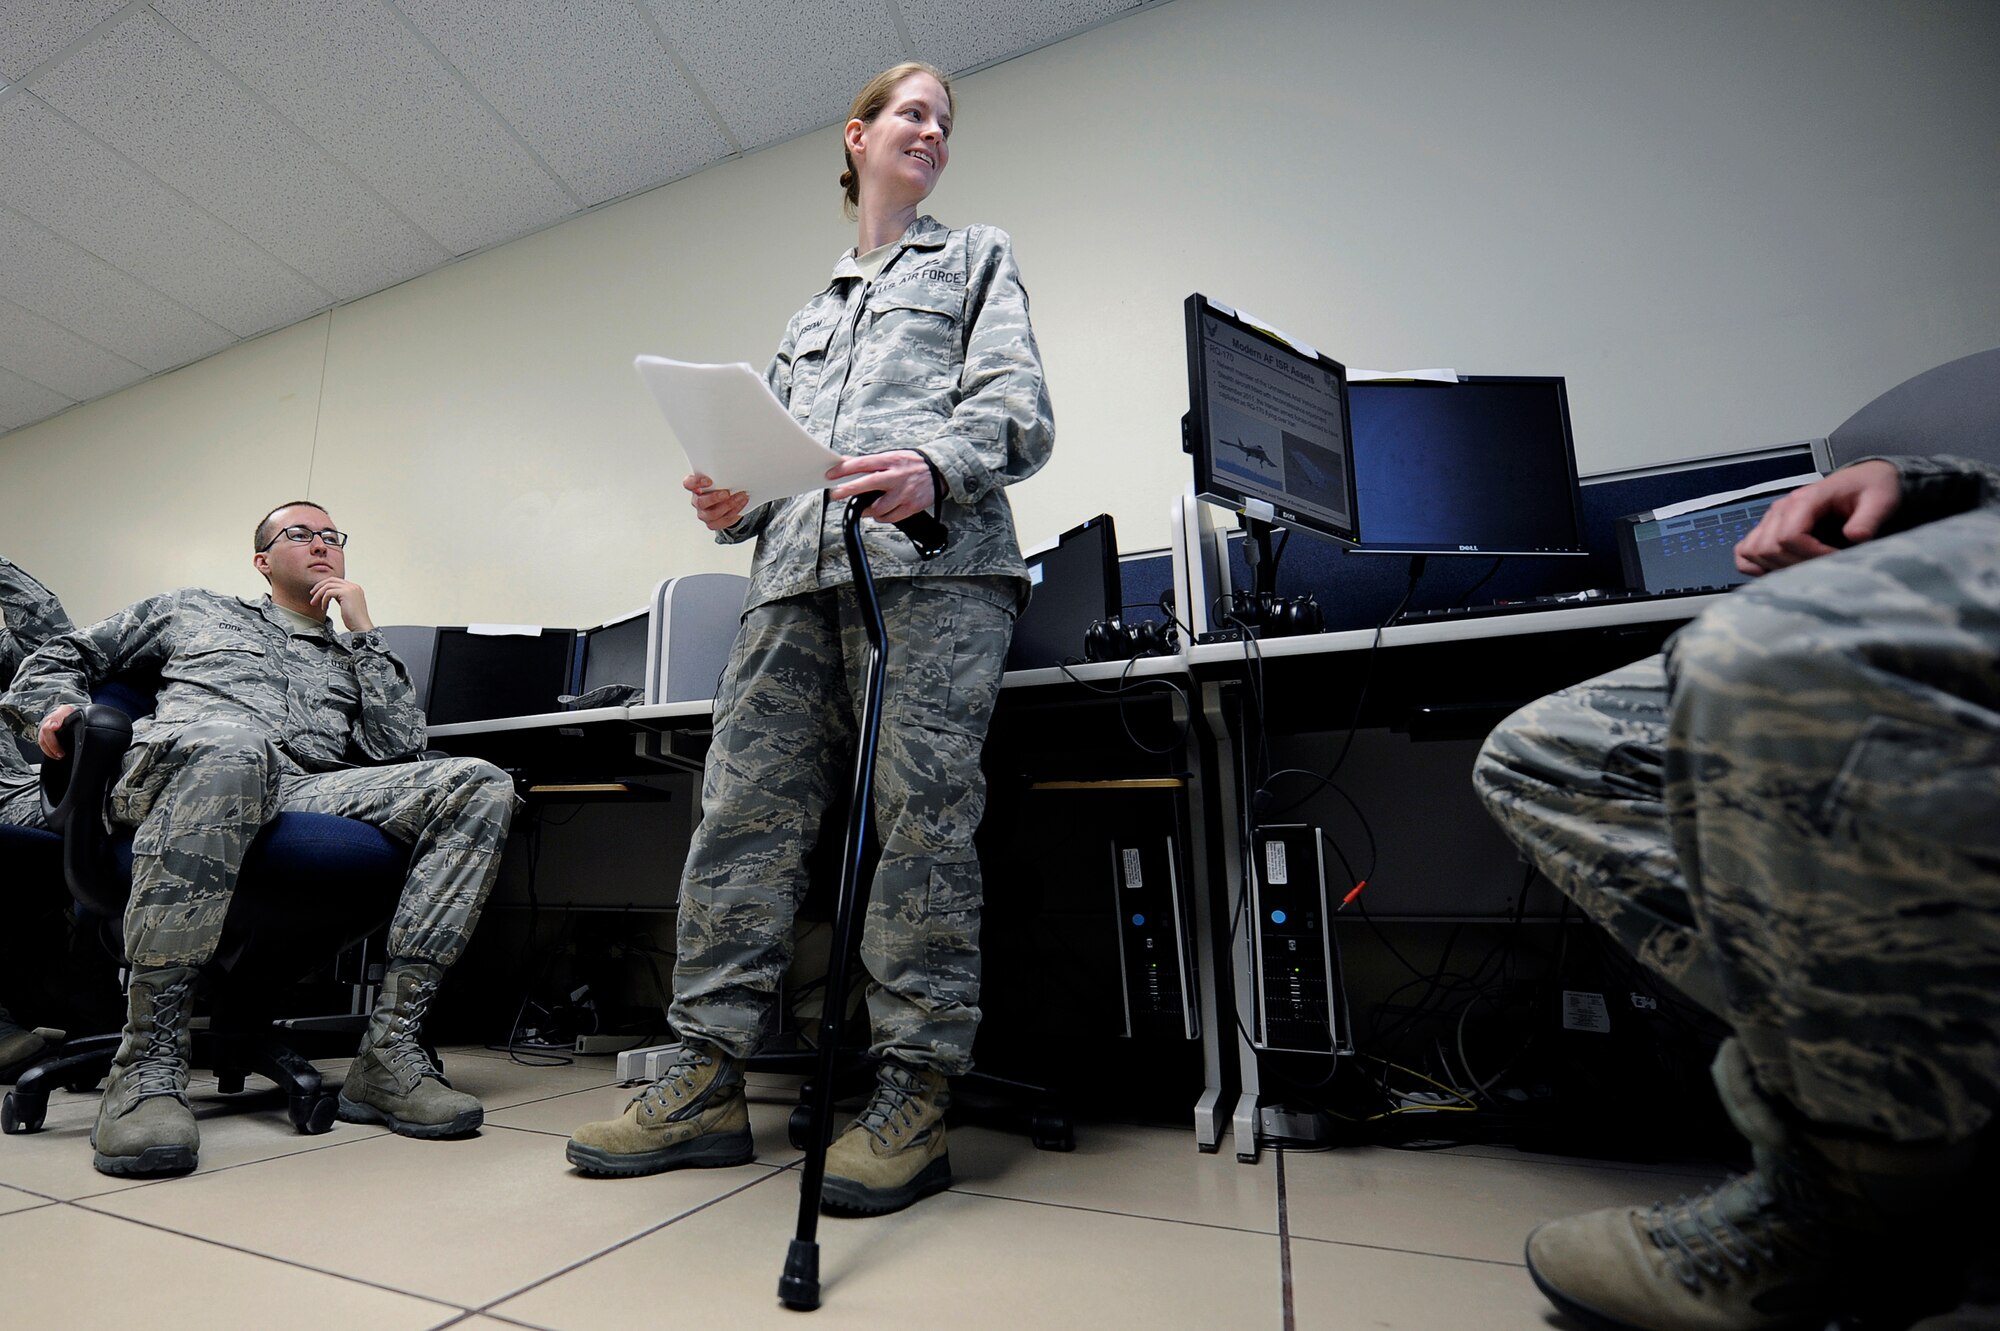 GOODFELLOW AIR FORCE BASE, Texas -- Master Sgt. Amy C. Dotson, 316th Training Squadron instructor, teaches her last Air Force intelligence class at the 316th Training Squadron March 9.  After 14 years as an Arabic linguist, Dotson is medically retiring from the Air Force. (U.S. Air Force photo/Tech. Sgt. Austin Knox)